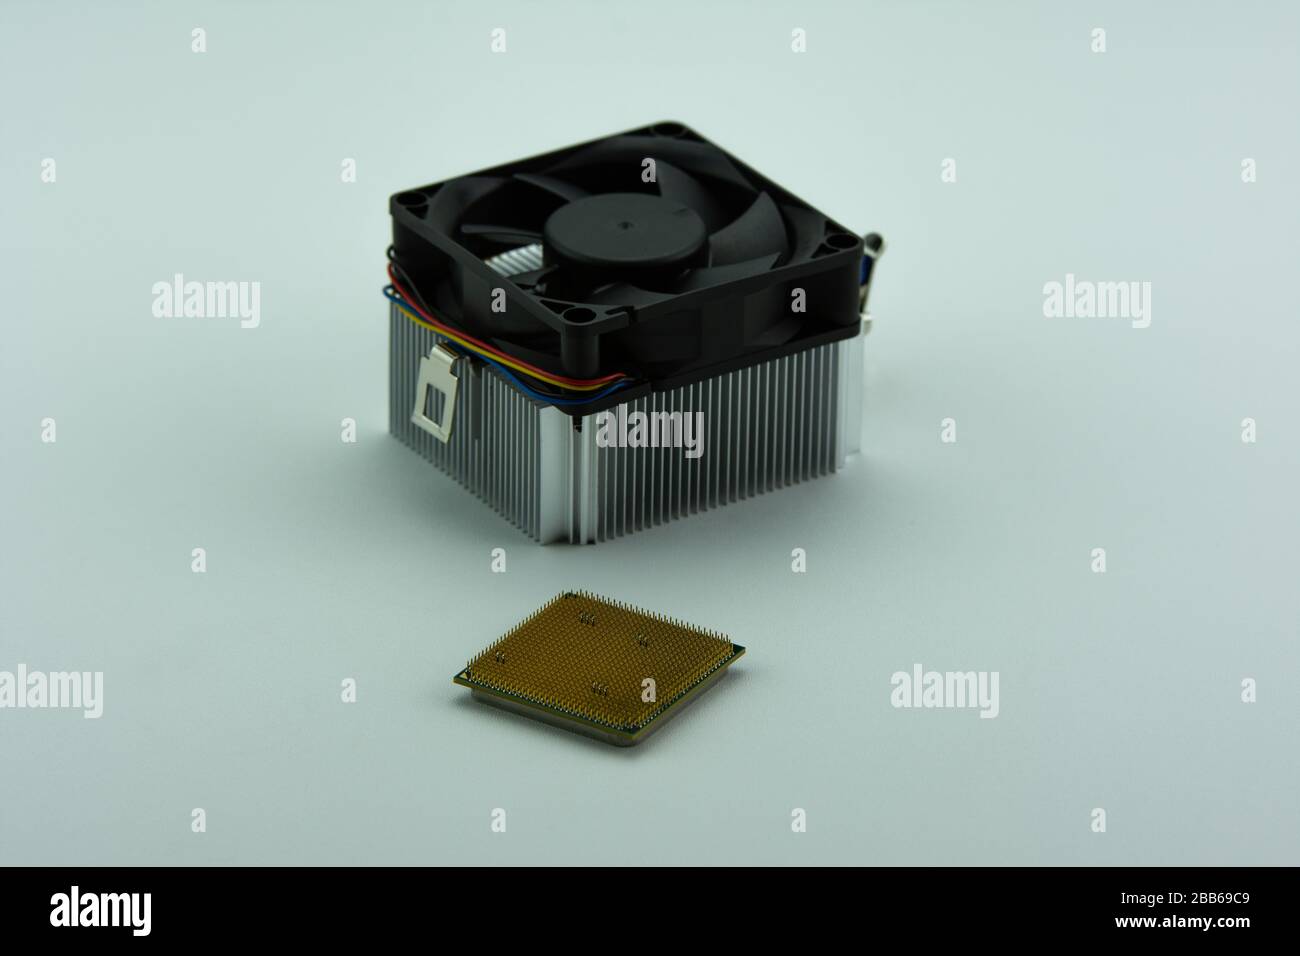 Multi-core Central Processing Unit (CPU) and aluminium cooling fan isolated on white background. Stock Photo